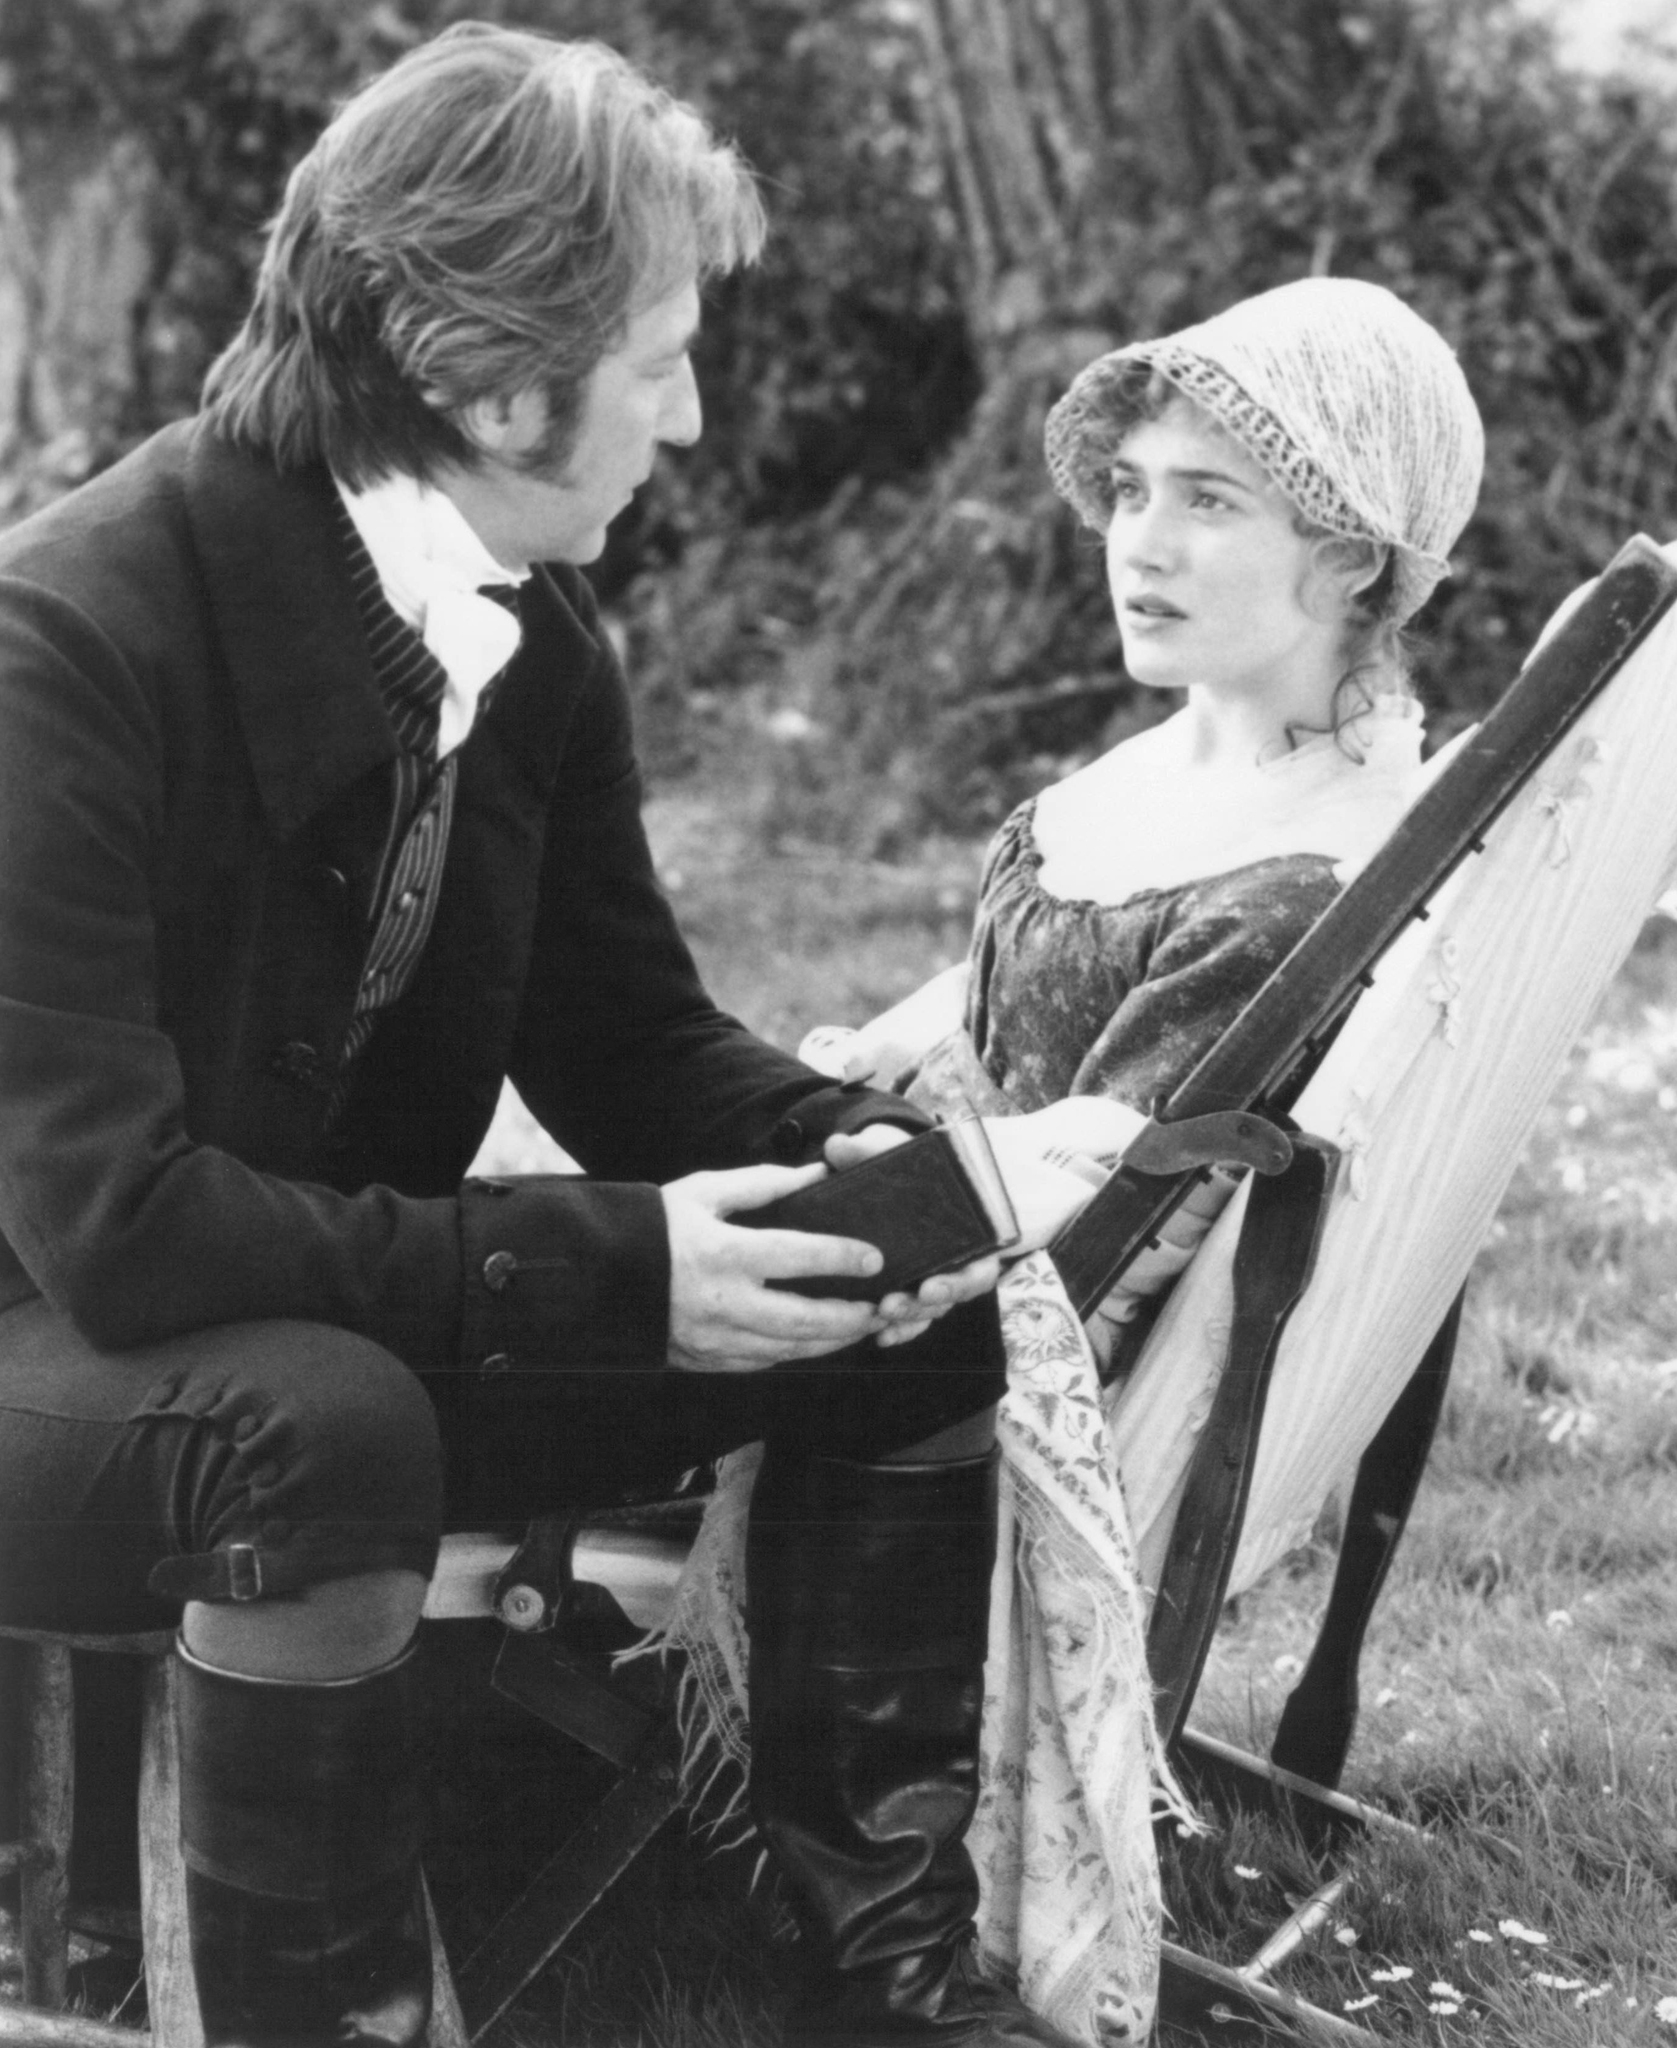 Still of Alan Rickman and Kate Winslet in Sense and Sensibility (1995)